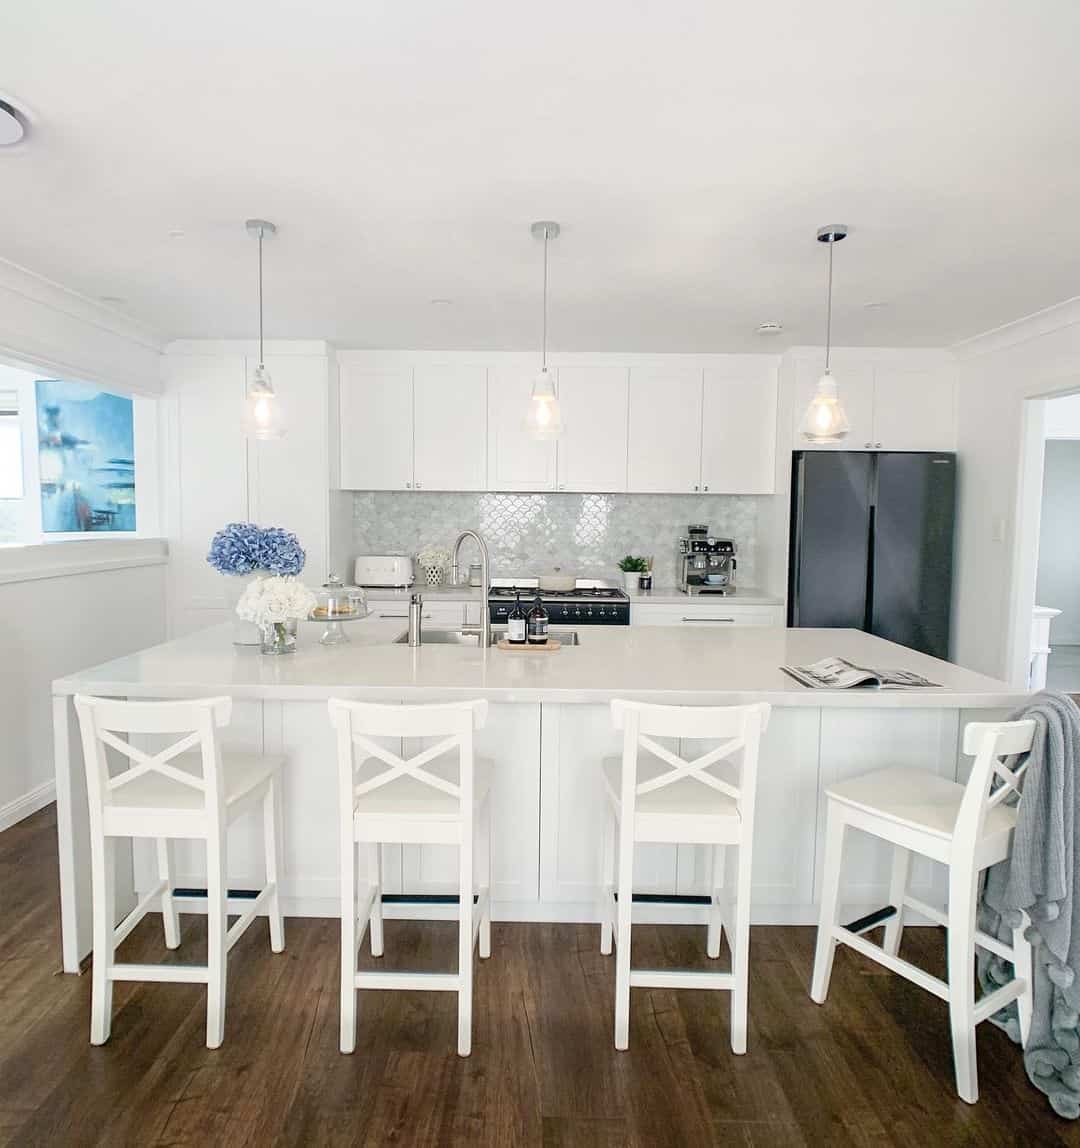 Minimalist Style in a White Kitchen with Bar Stool Seating